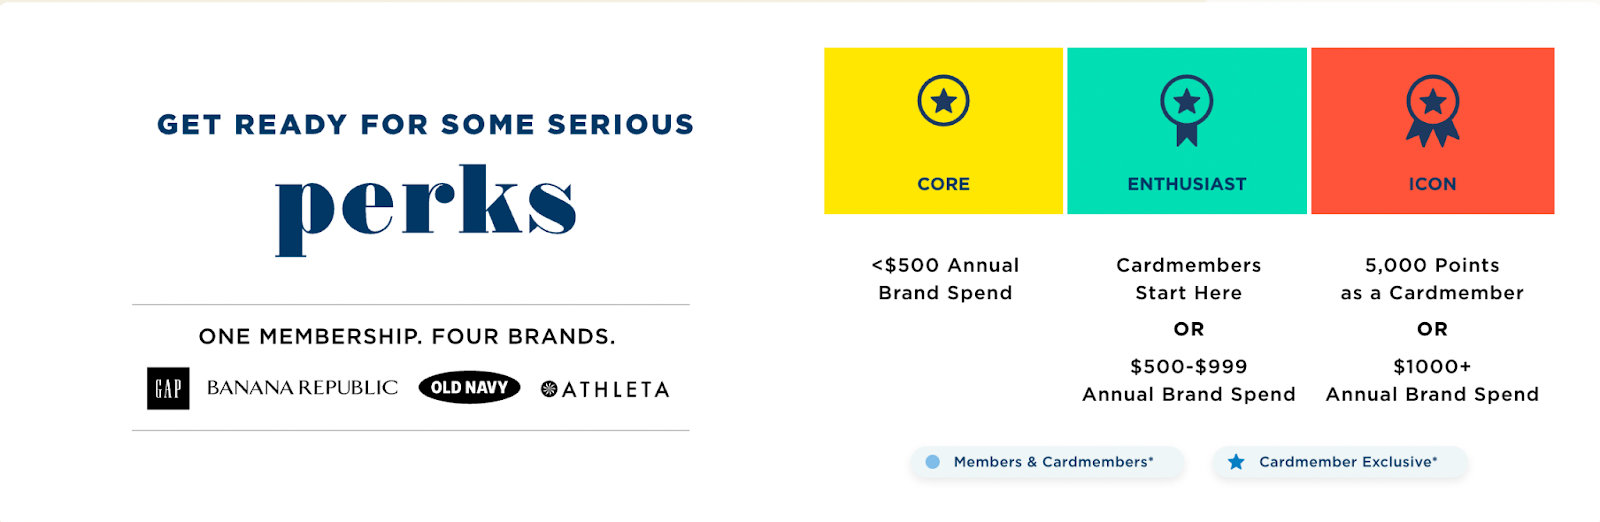 Why Large Rewards Program Fail–A screenshot showing Old Navy’s various loyalty program tiers: Core (<$500 Annual Brand Spend), Enthusiast (Cardmembers Start Here OR $500-$999 Annual Brand Spend), and Icon (5,000 as a Cardmember OR $1000+ Annual Brand Spend). The image also shows all the brands included in the membership: Gap, Banana Republic, Old Navy, and Athleta.